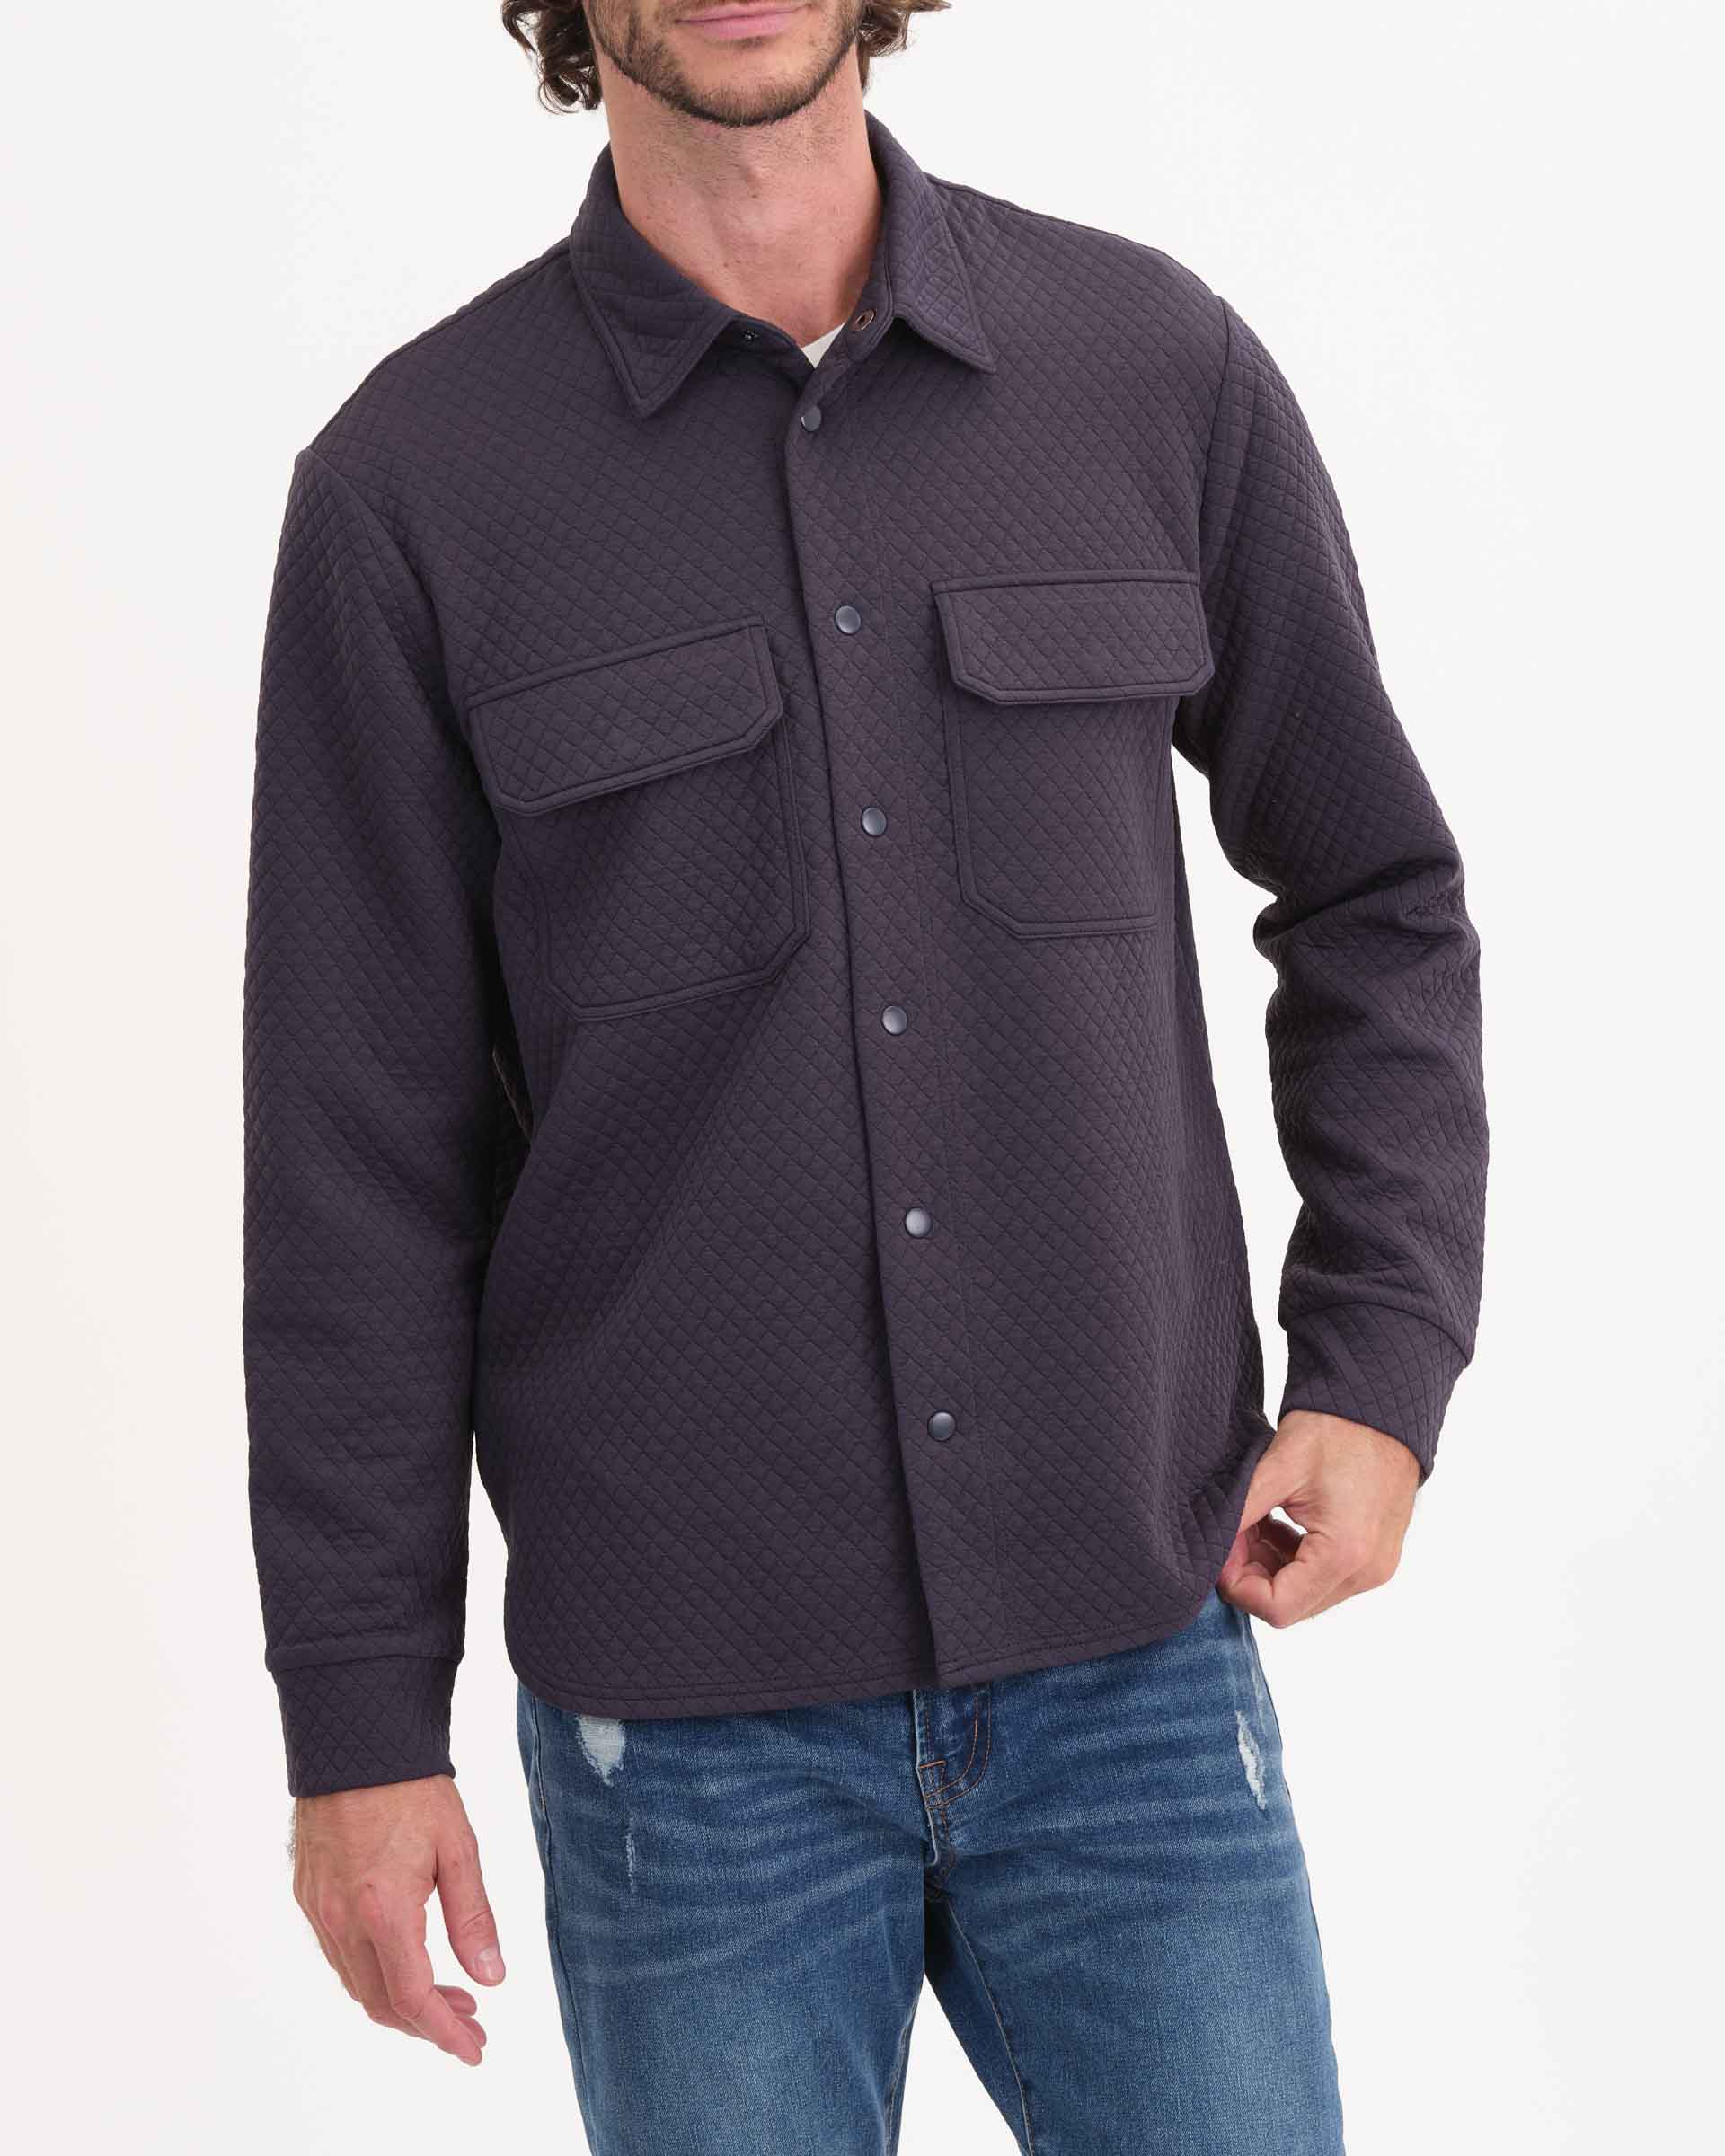 Men's Quilted Button Down Collared Shacket, Denim Blue | M Magaschoni Men's